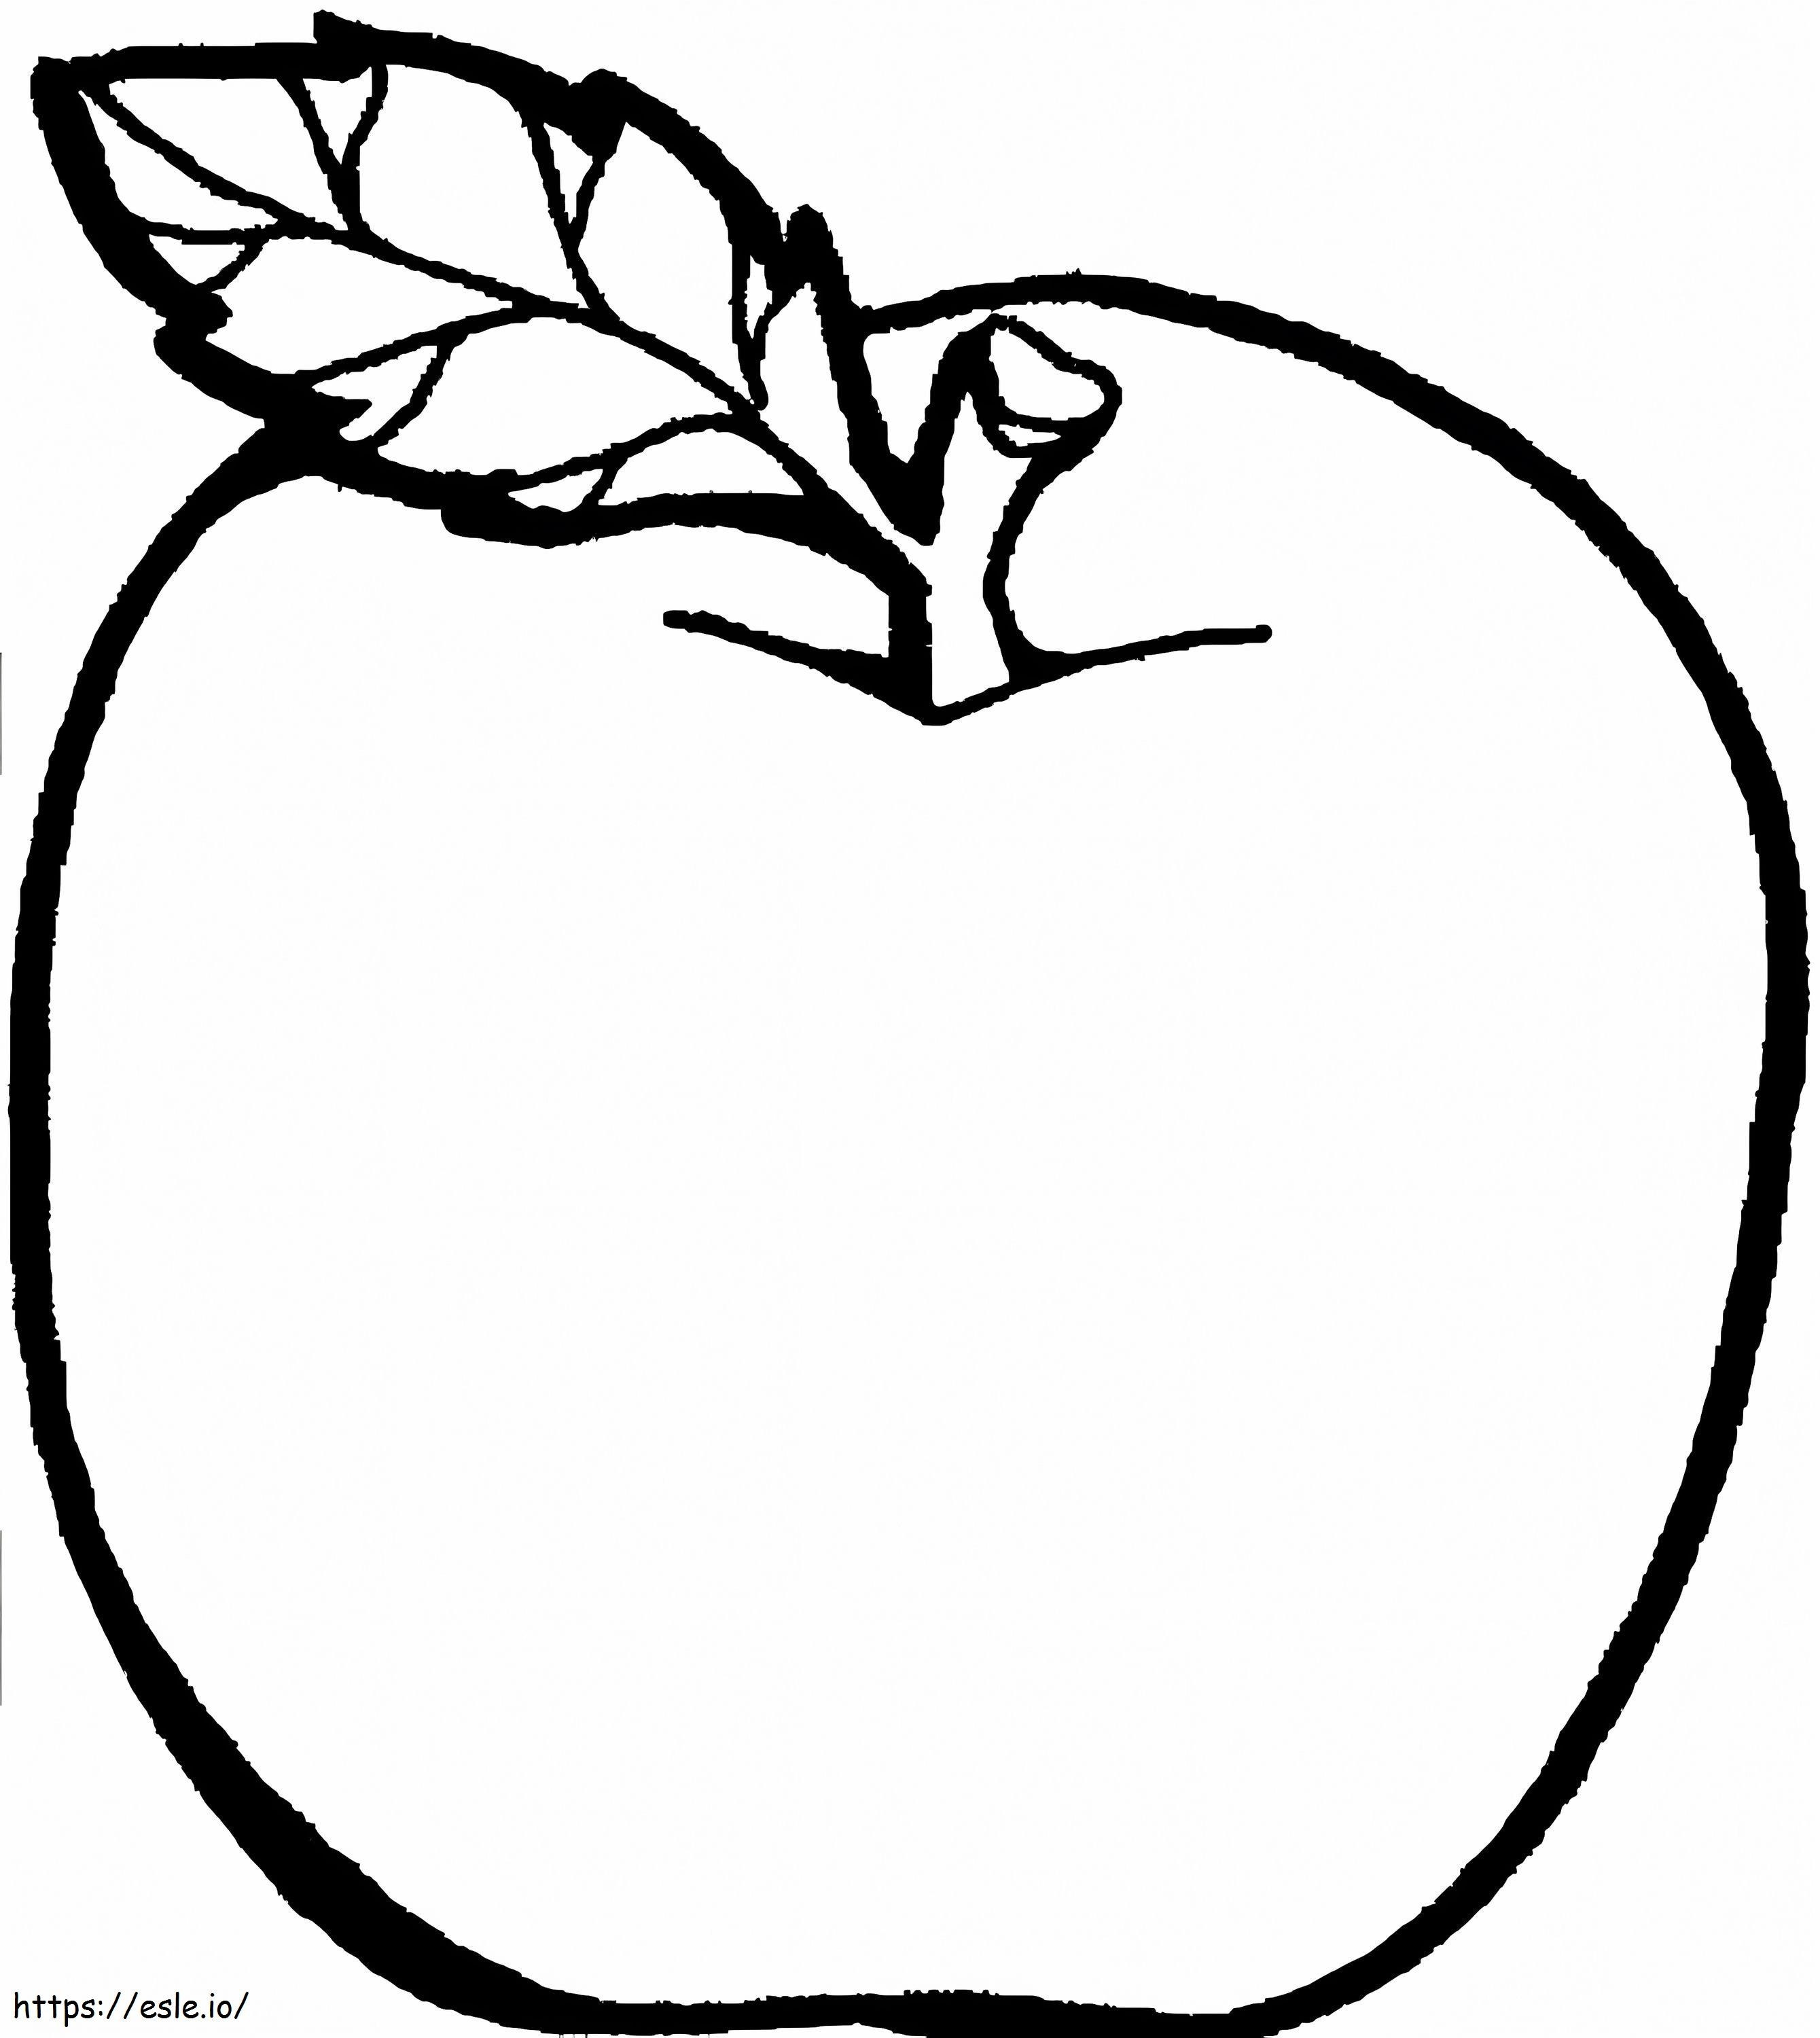 Basic Apple Drawing coloring page